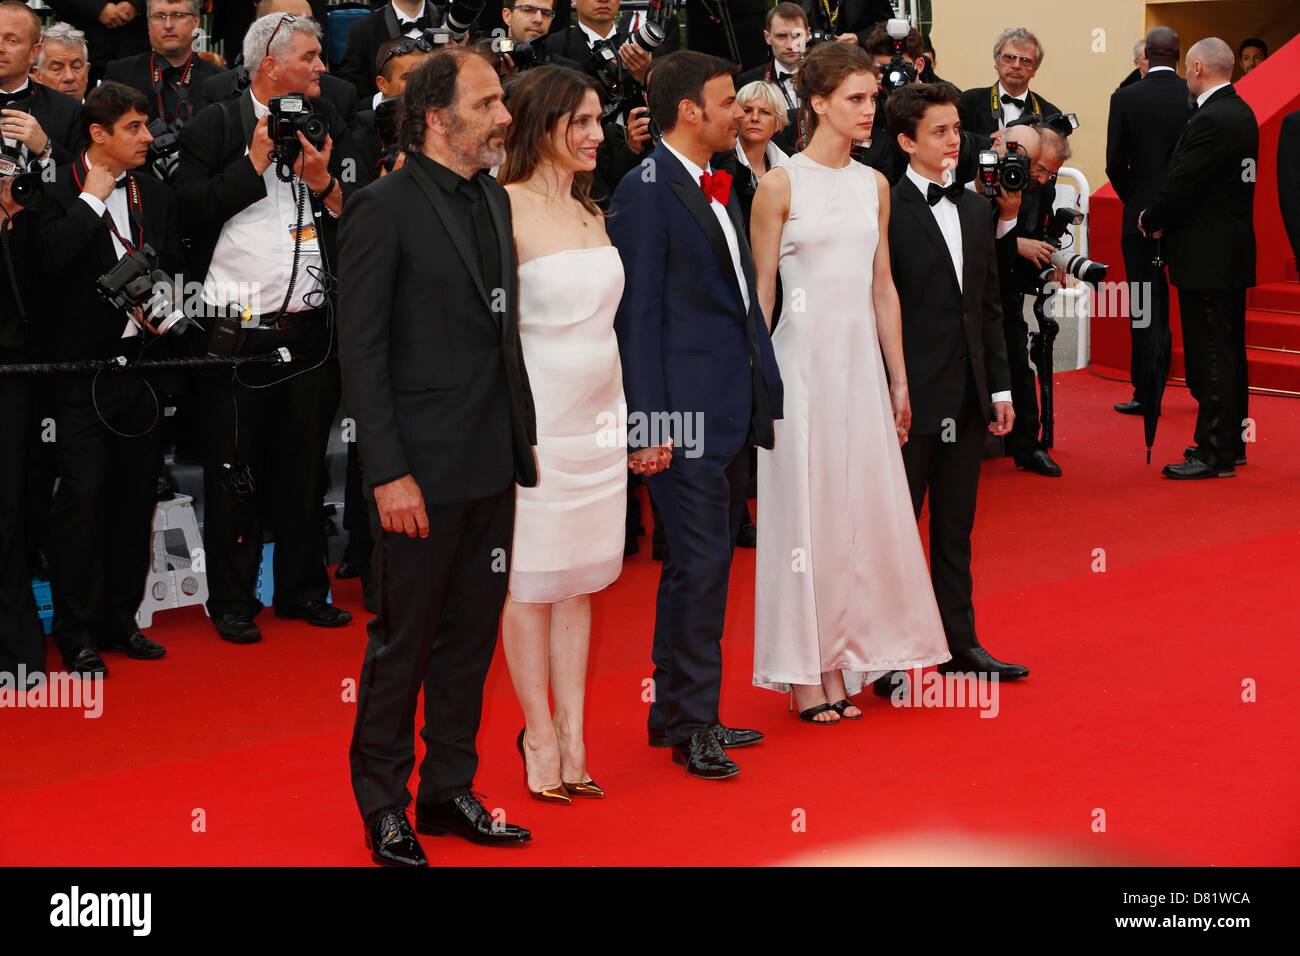 Cannes, France. 16th May 2013. FREDERIC PIERROT, GERALDINE PAILHAS ...